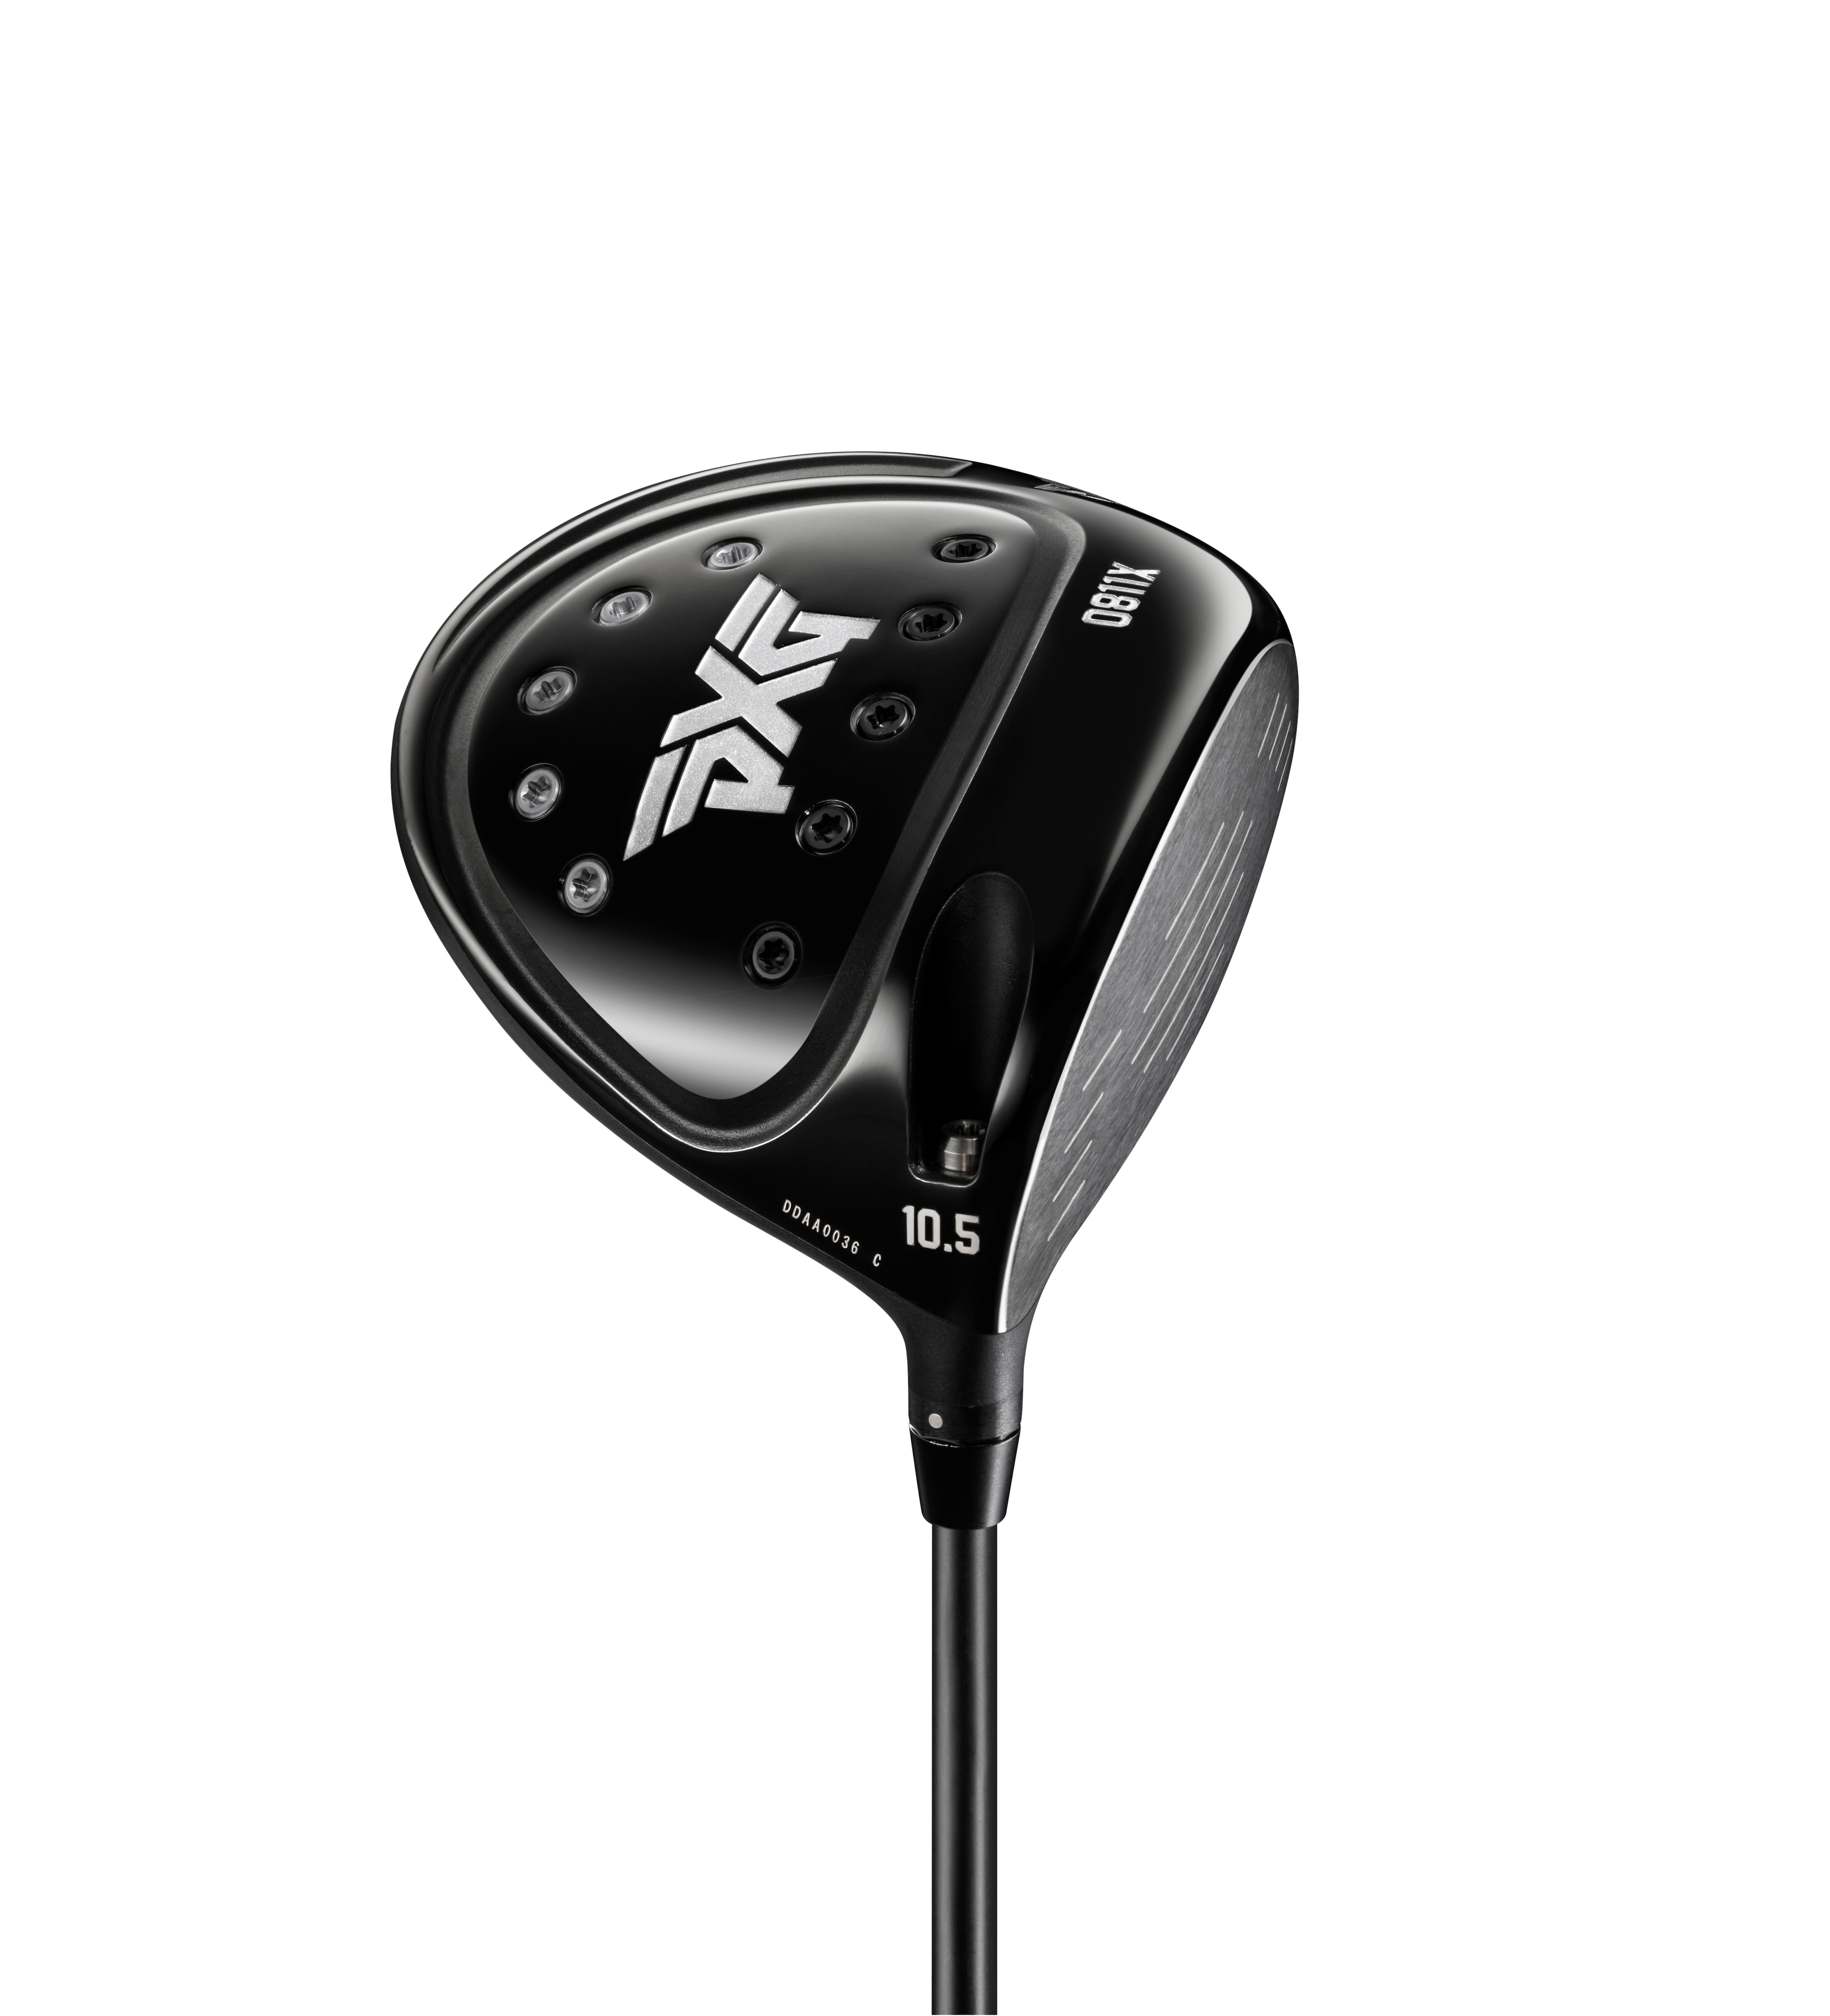 Pxg 0811 driver review